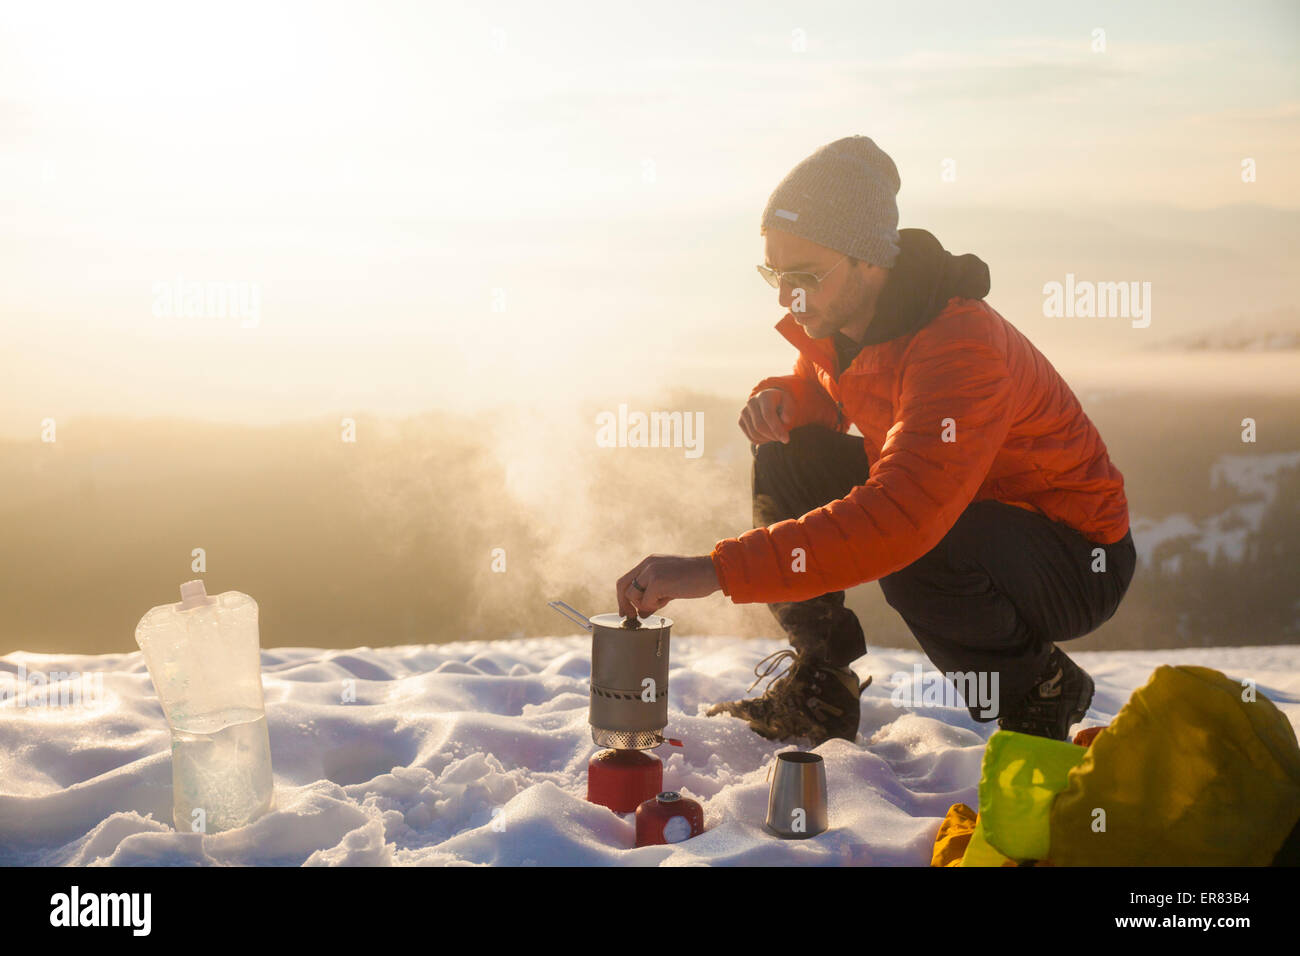 A climber attends to his boiling stove while camping in the mountains. Stock Photo